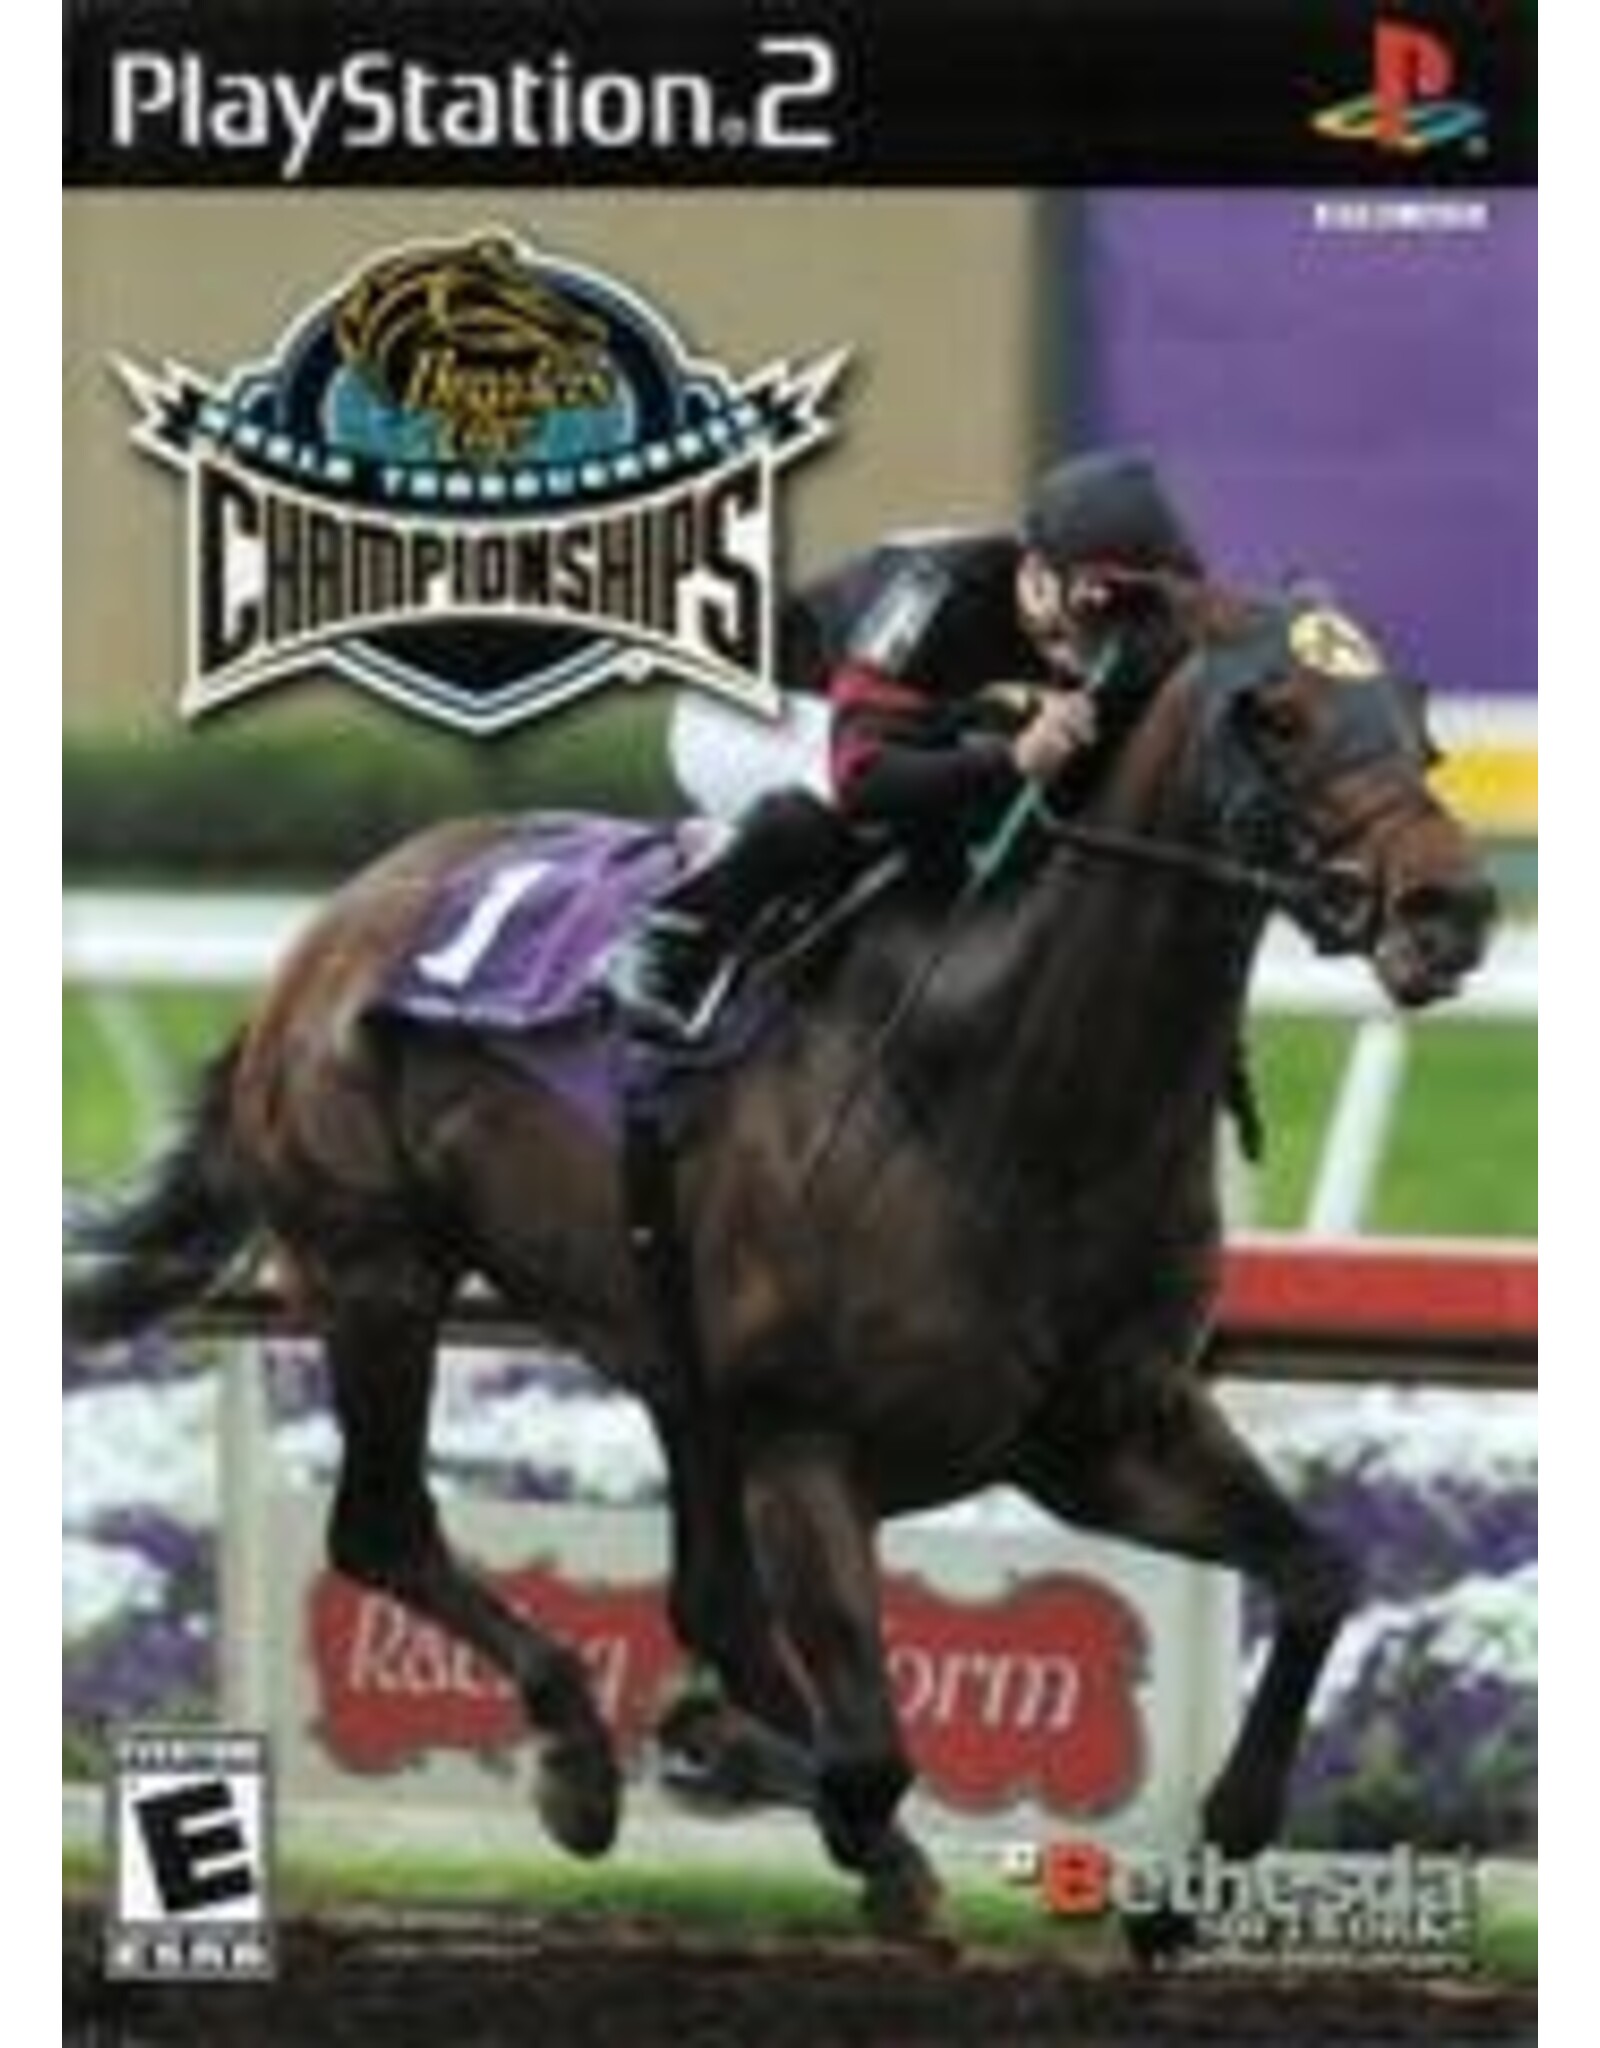 Playstation 2 Breeders' Cup World Thoroughbred Championships (CiB)